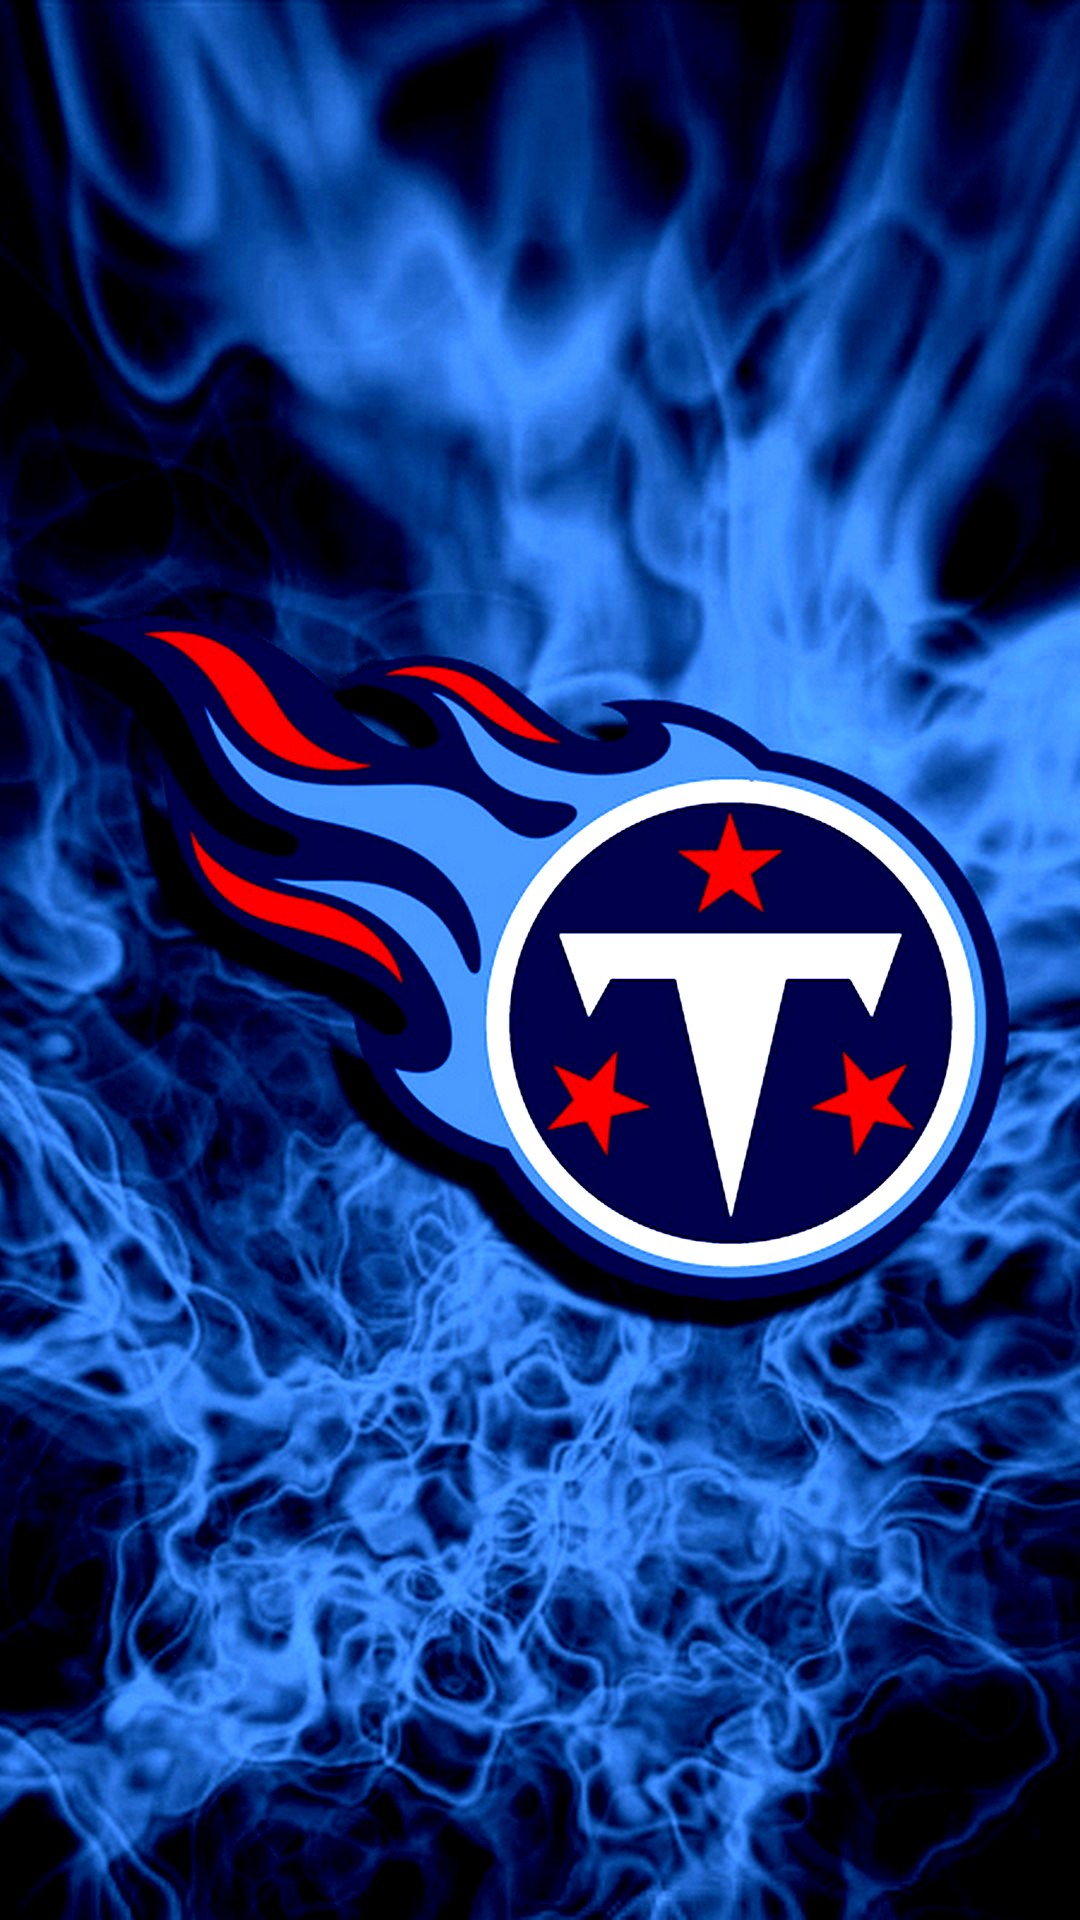 Screensaver iPhone Tennessee Titans with high-resolution 1080x1920 pixel. Donwload and set as wallpaper for your iPhone X, iPhone XS home screen backgrounds, XS Max, XR, iPhone8 lock screen wallpaper, iPhone 7, 6, SE and other mobile devices